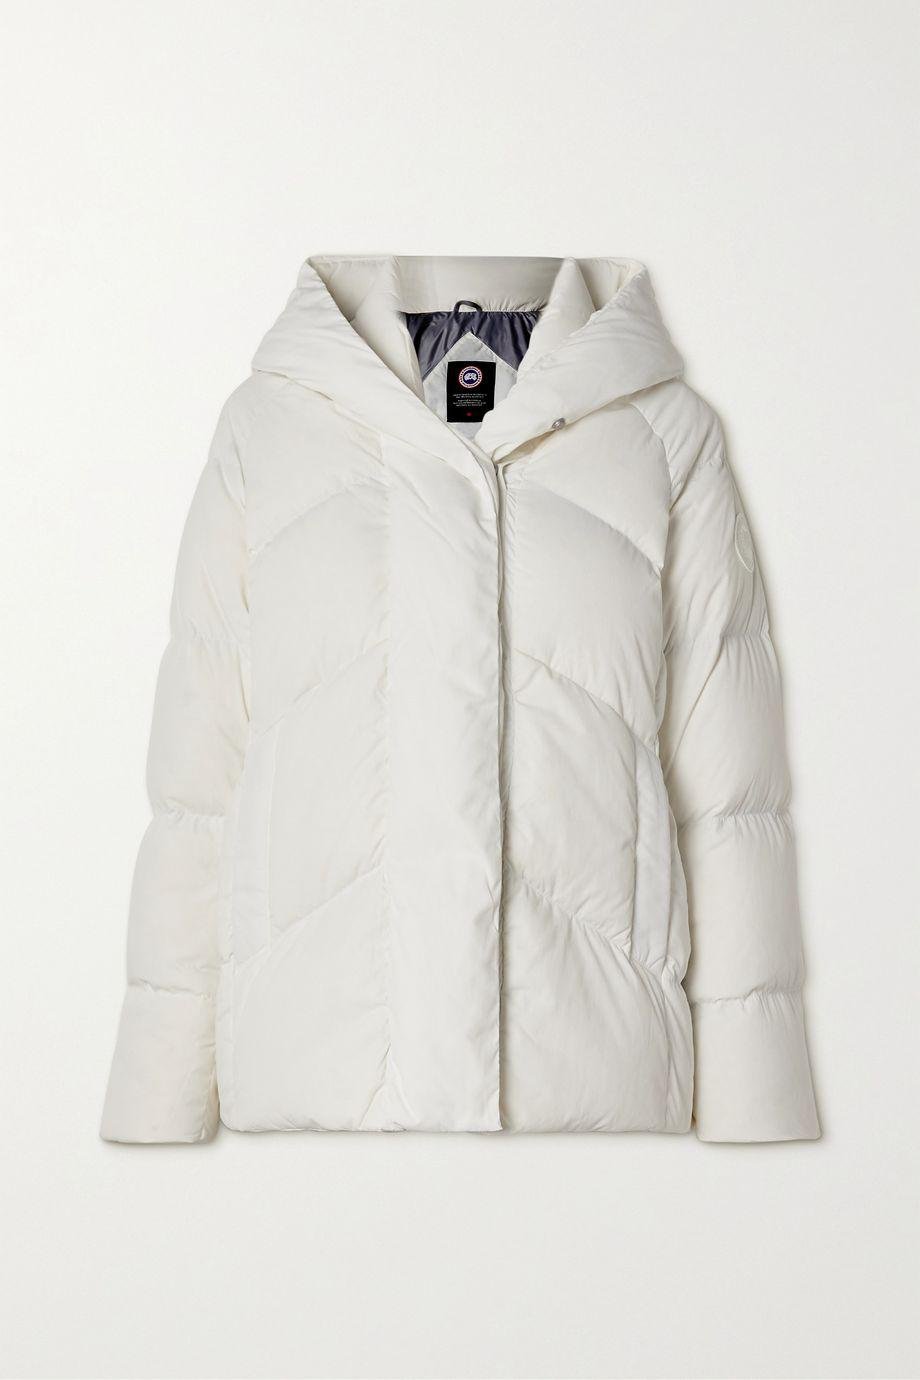 Marlow hoodied quilted Ventera down jacket by CANADA GOOSE